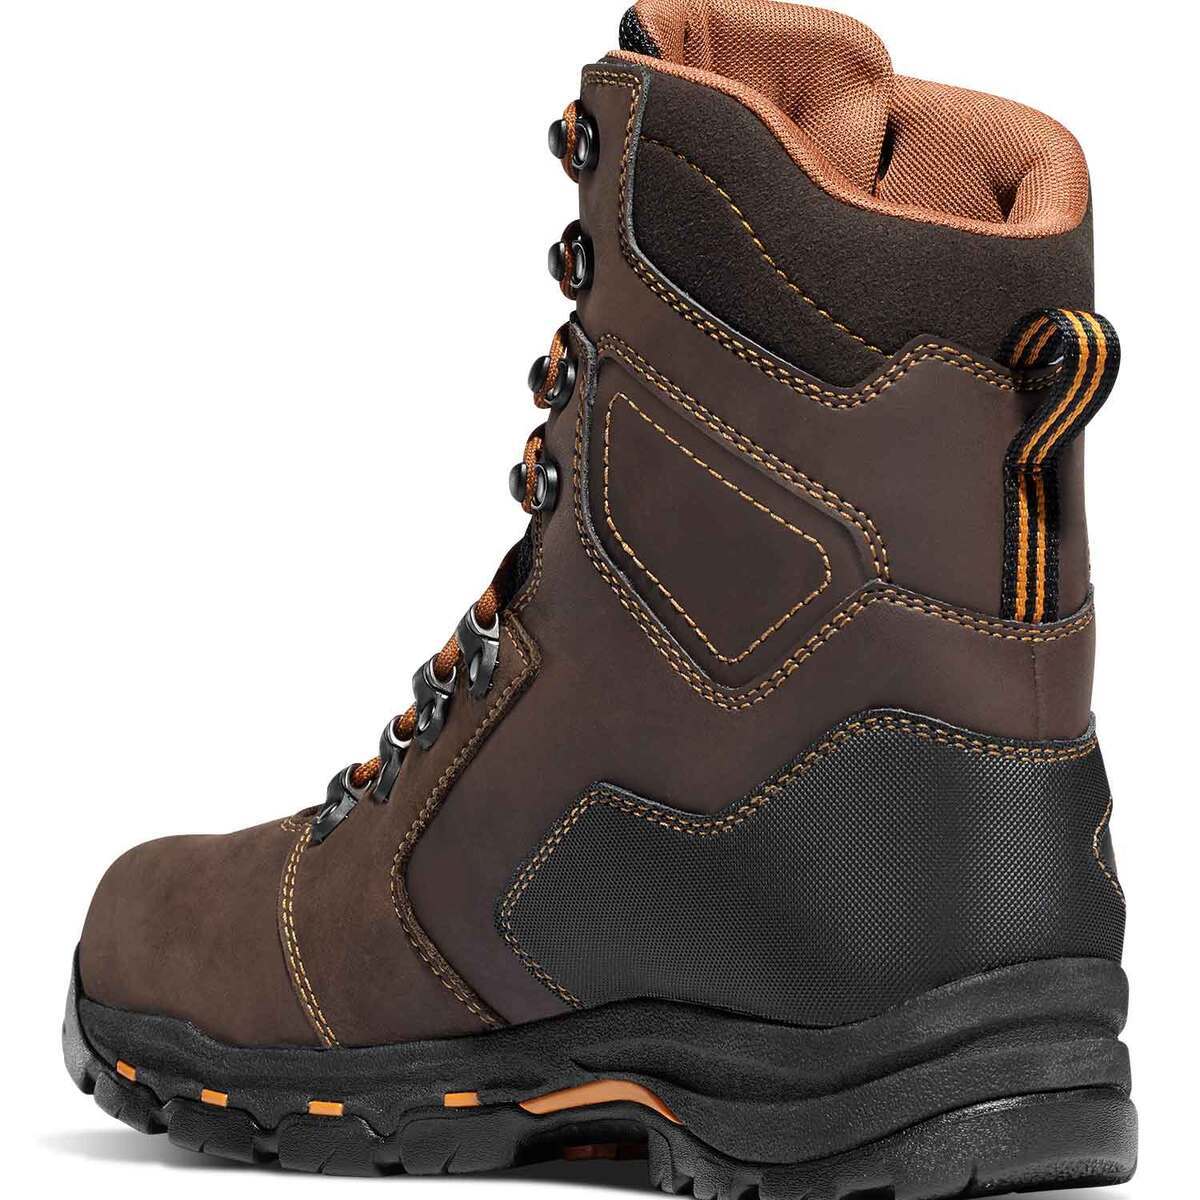 Danner Men's Vicious High Safety GORE-TEX Composite Toe Work Boots ...